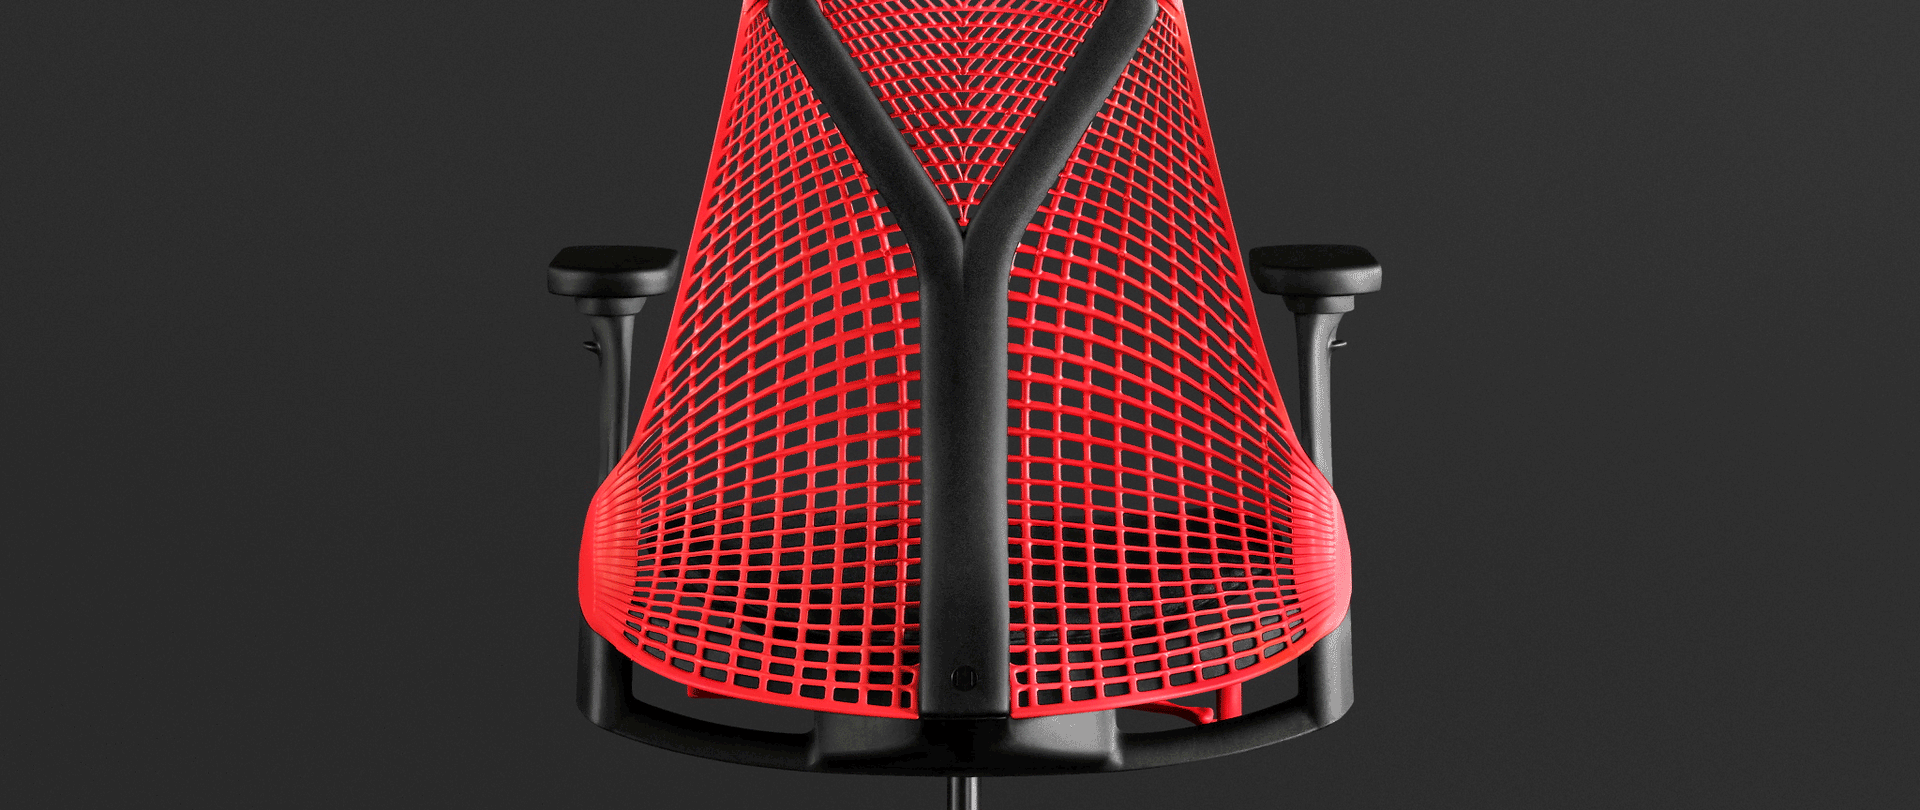 An animation over a photograph of the Sayl Chair in red highlights the benefits of its 3D Intelligent Suspension Back.